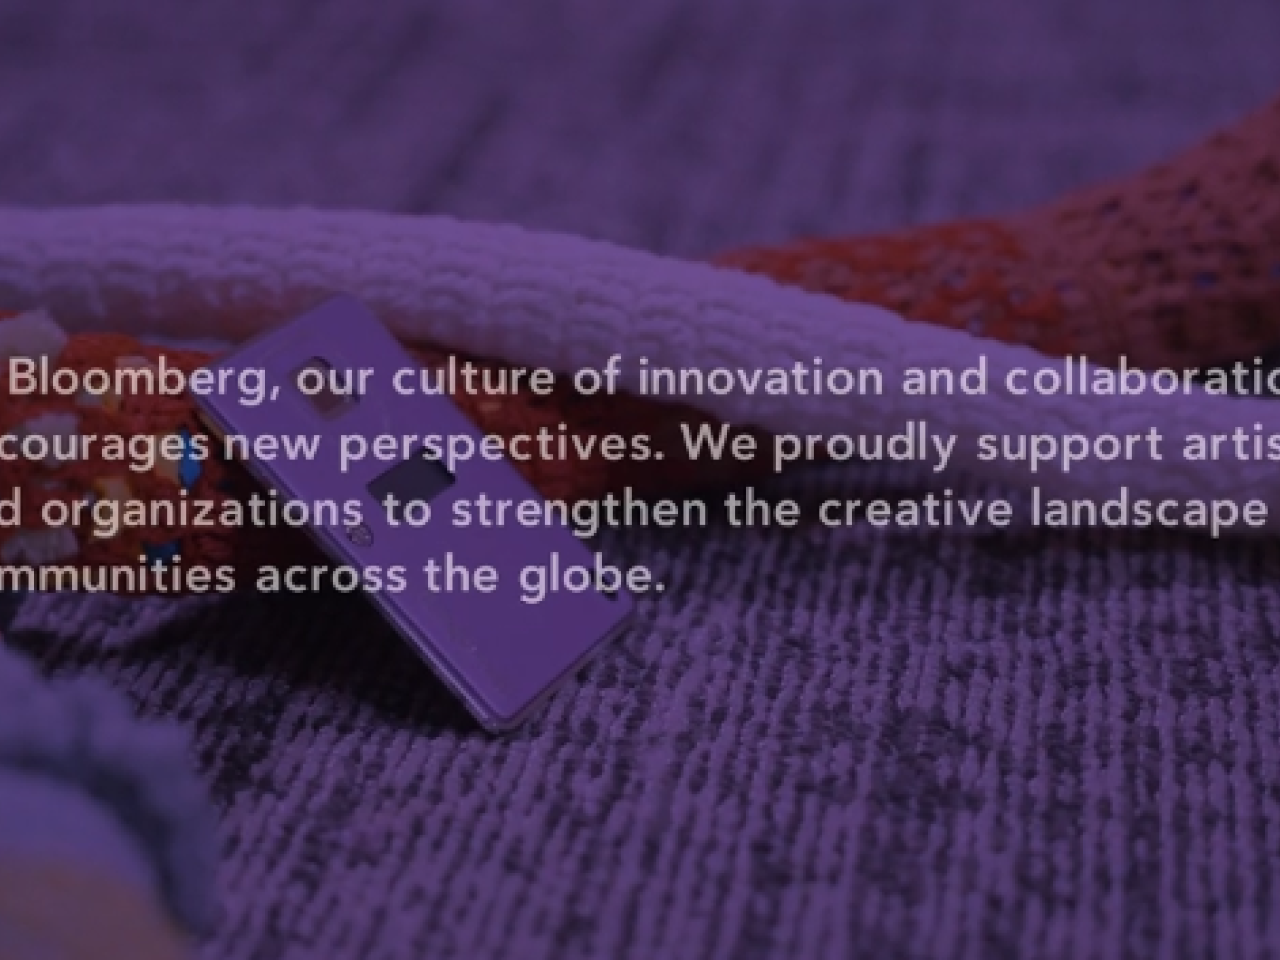 At Bloomberg, our culture of innovation and collaboration encourages new perspectives. We proudly support artists and organizations to strengthen the creative landscape in communities across the globe.